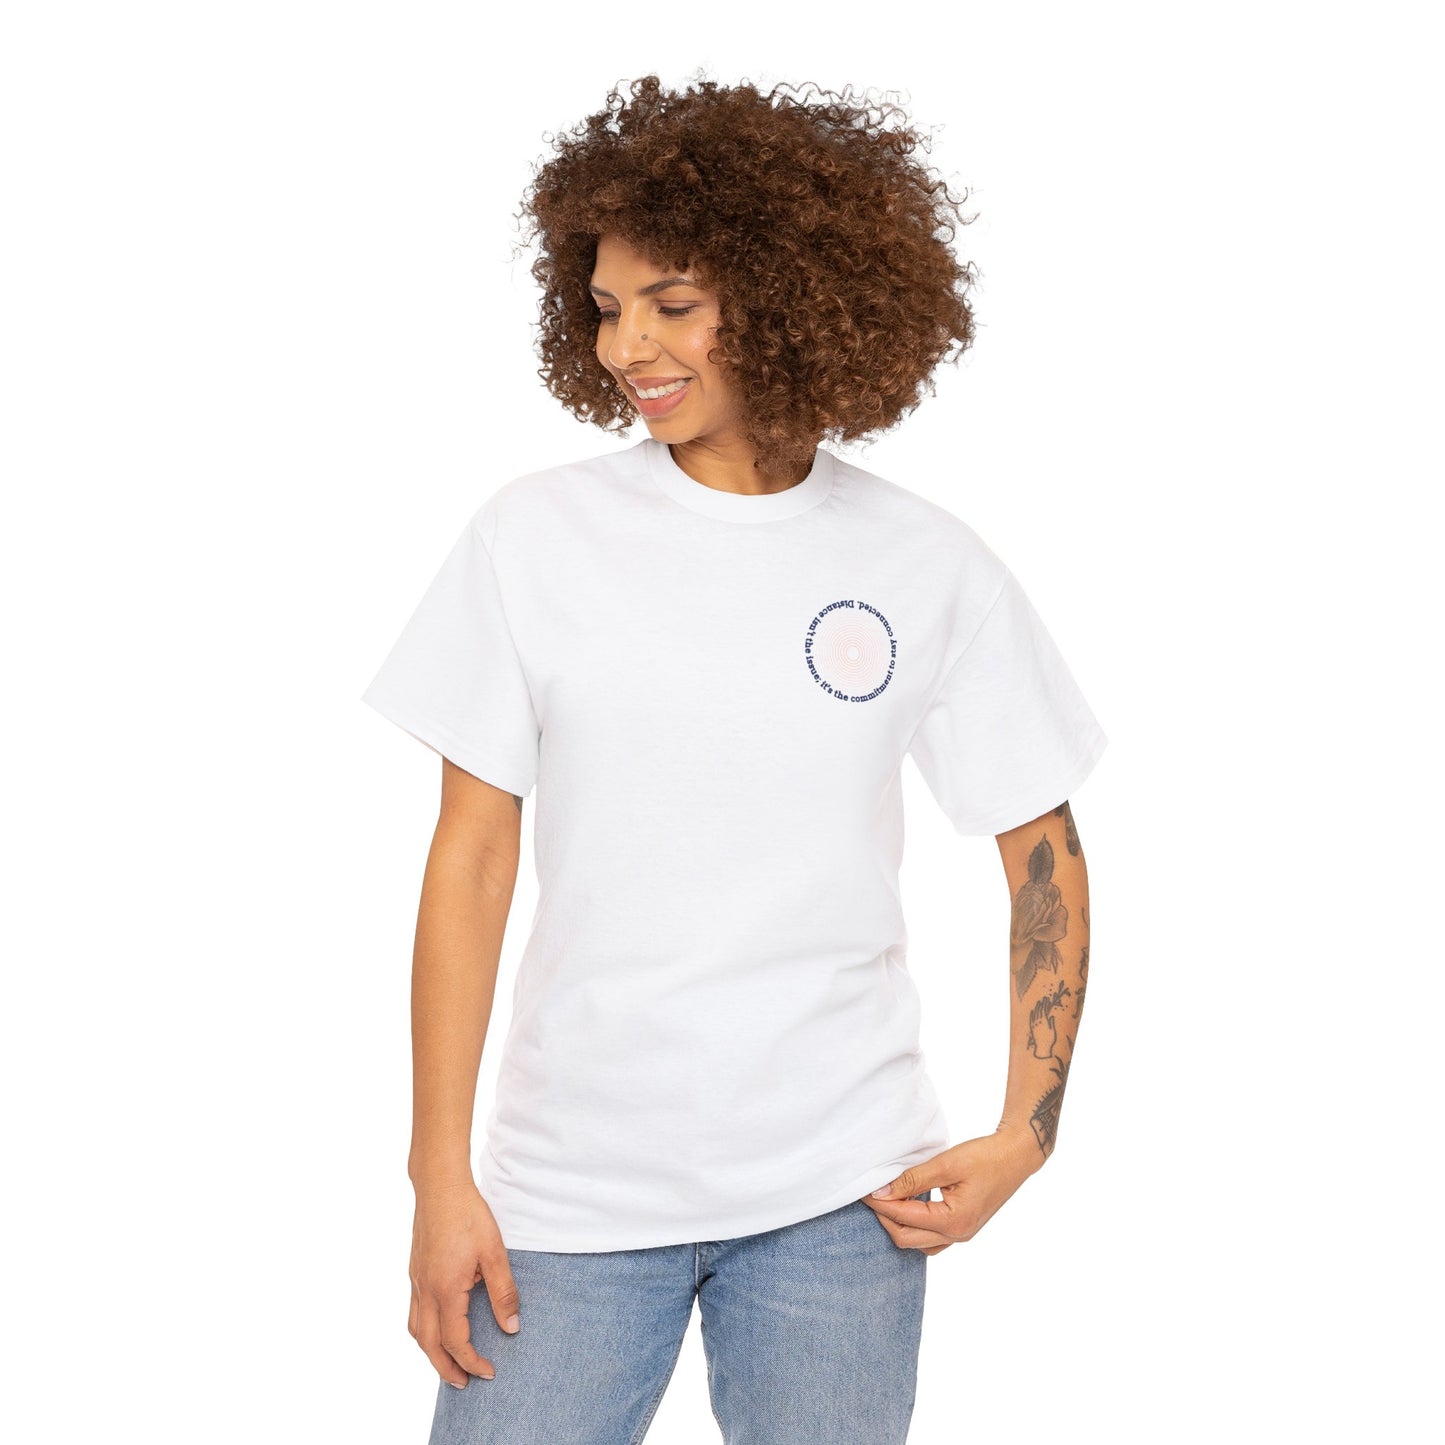 Intouch T-Shirt